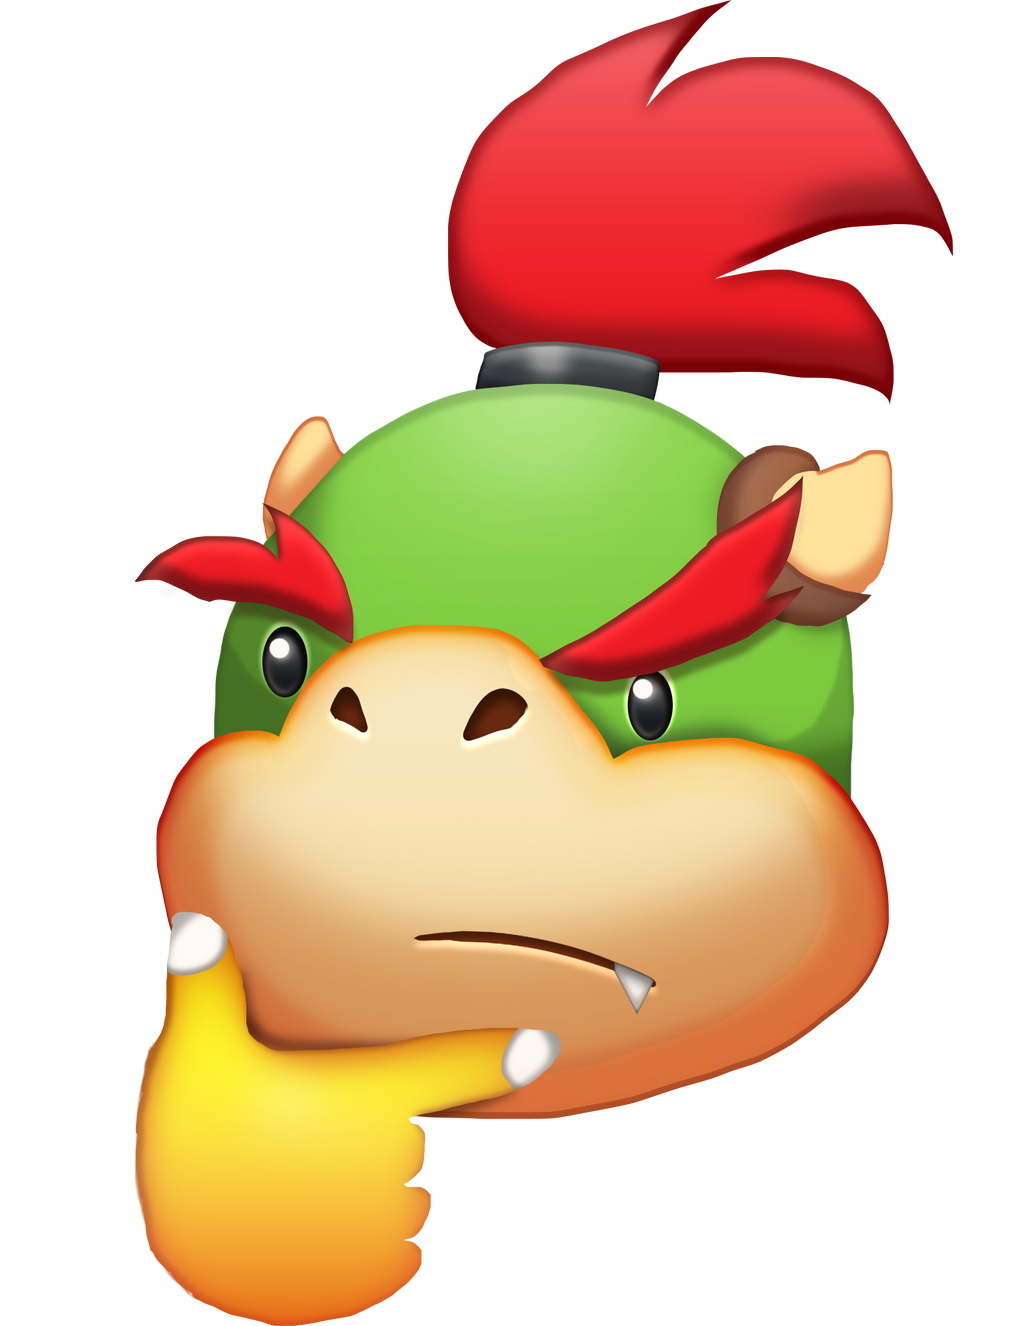 bowser_jr_thinking_by_hg_the_hamster_dbuxafg-fullview.png